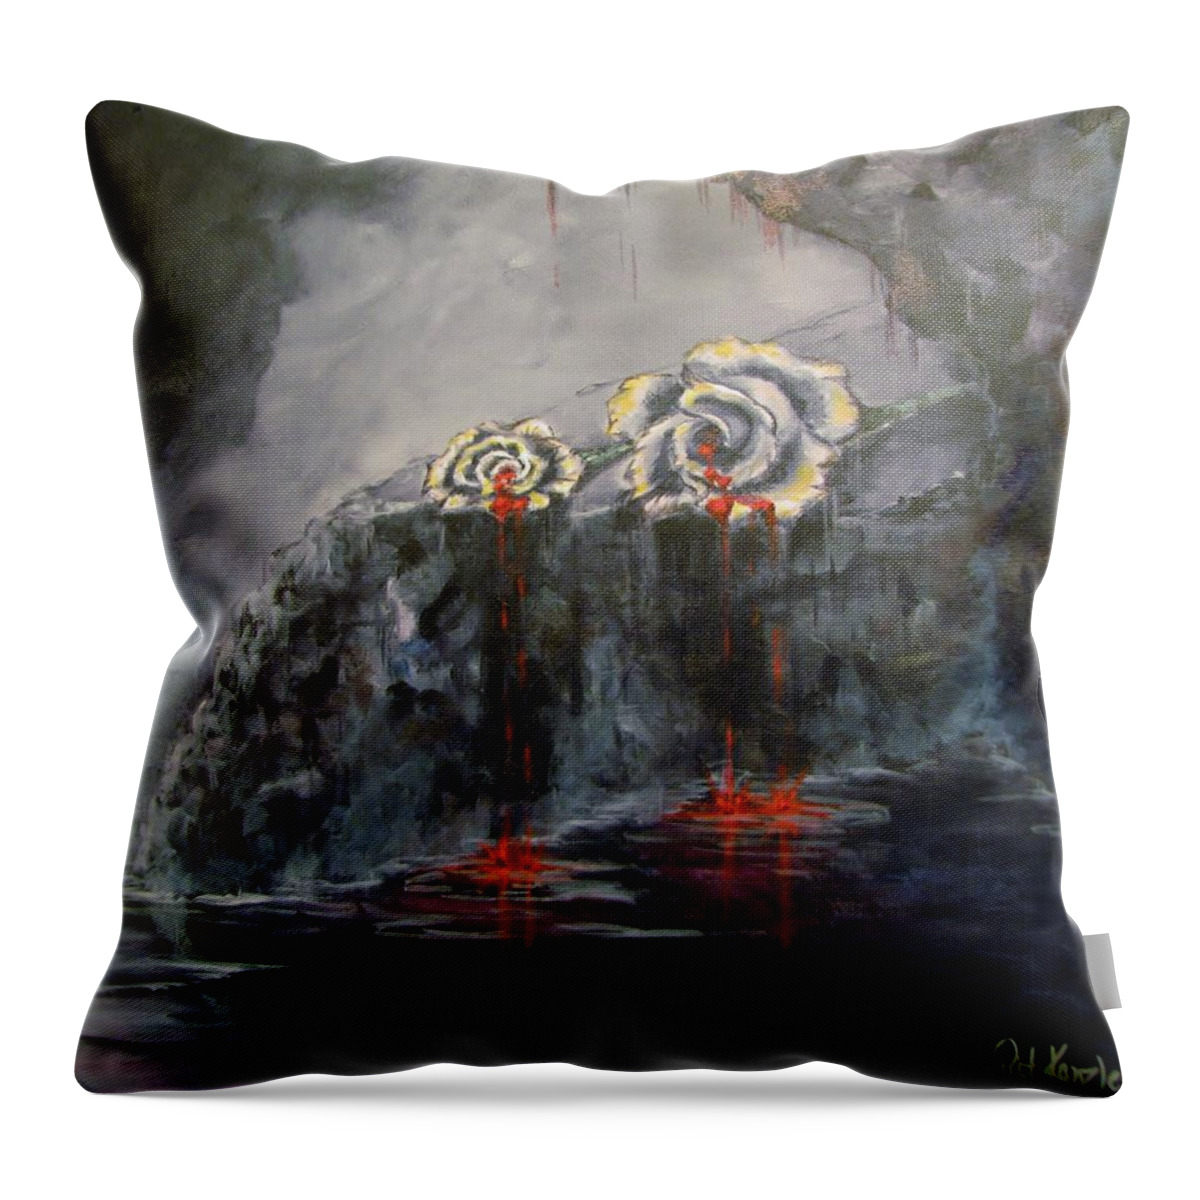 White/dying Roses; Tears Of Blood; Foggy Grotto Throw Pillow featuring the painting Gaia's Tears by Patricia Kanzler